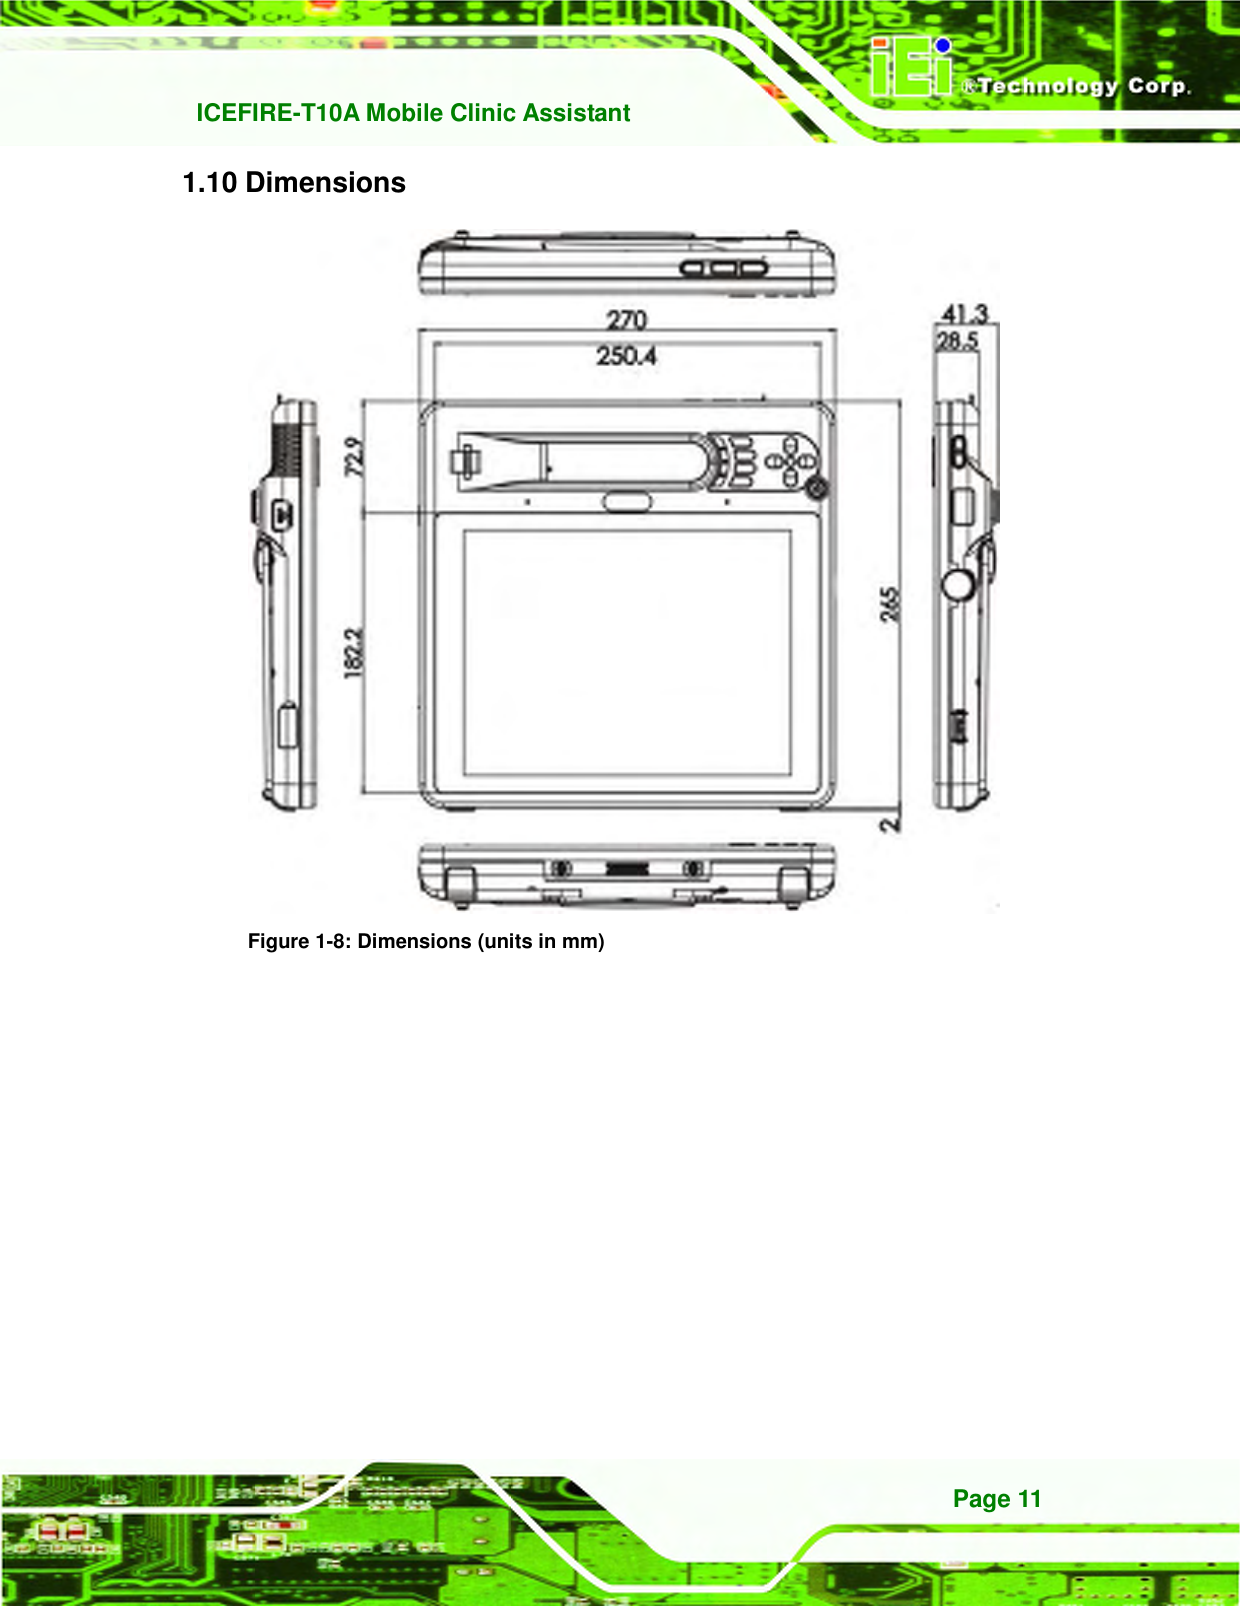   ICEFIRE-T10A Mobile Clinic Assistant Page 11 1.10 Dimensions  Figure 1-8: Dimensions (units in mm) 